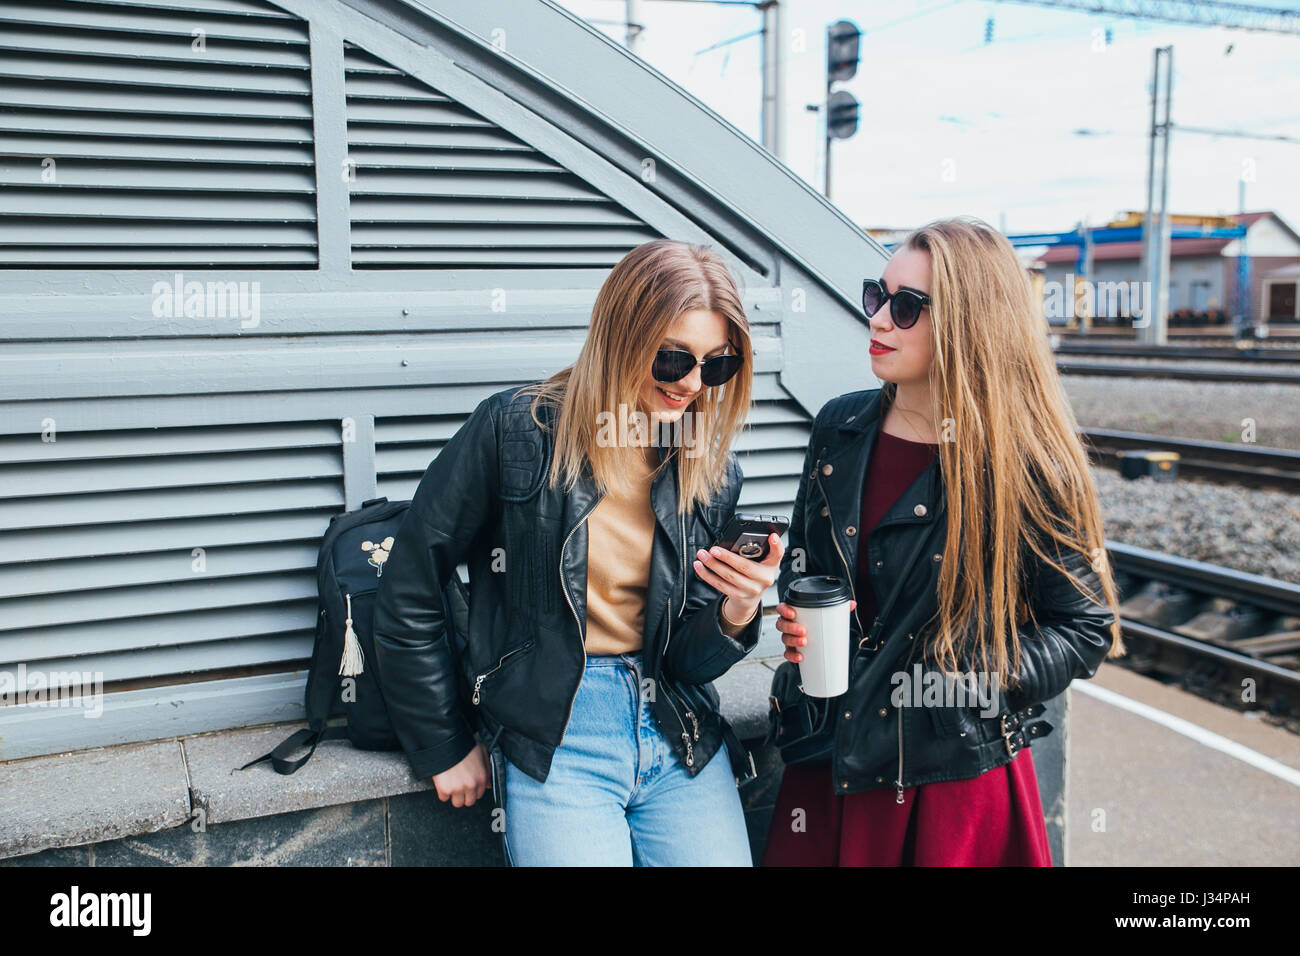 Two Women Talking in the City.Outdoor lifestyle portrait of two best friends hipster girls wearing stylish Leather Jacket and sunglasses with cofee, going crazy and having great time together Stock Photo